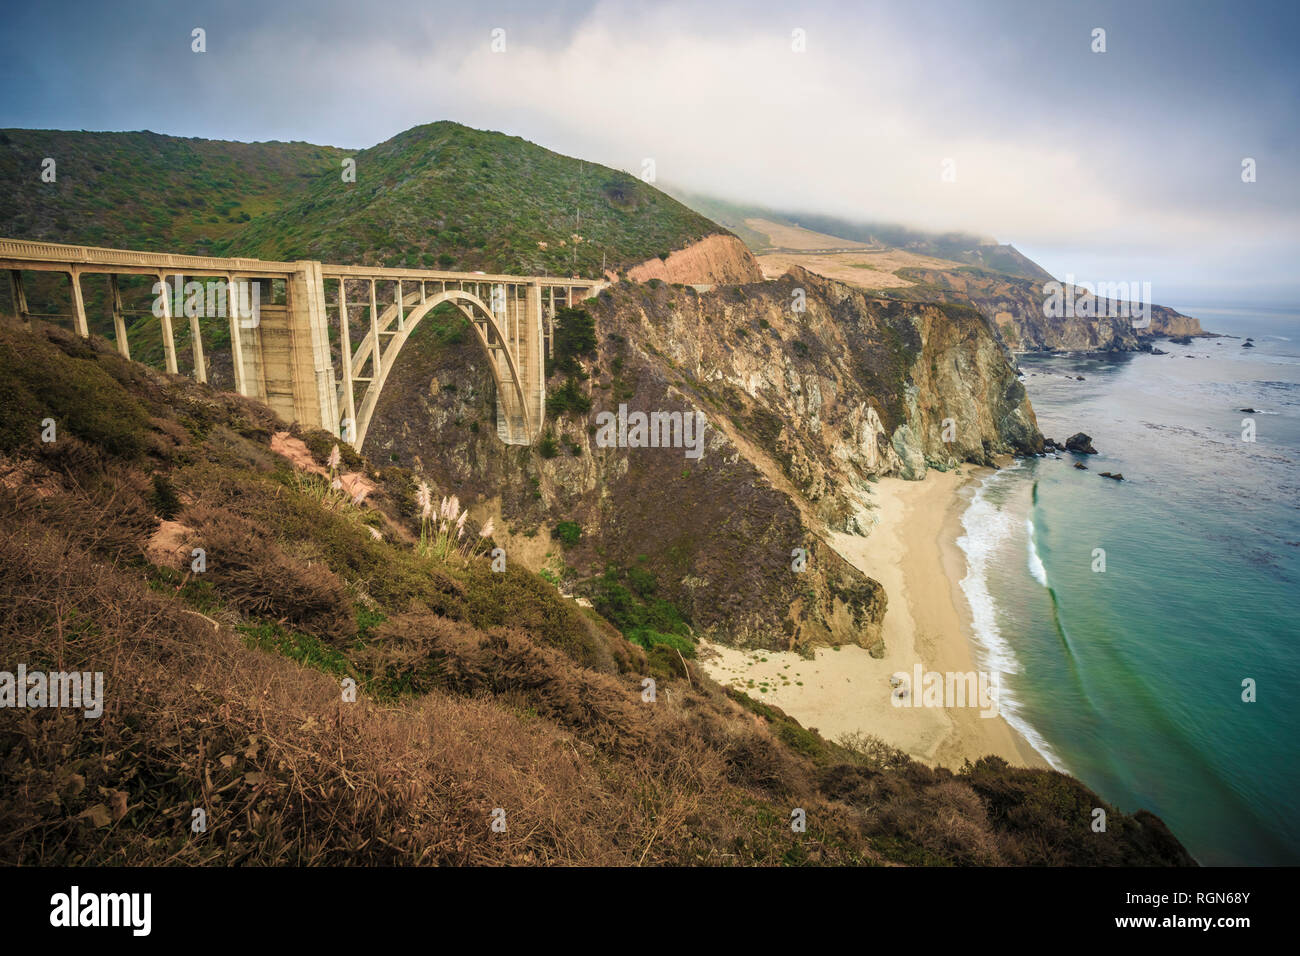 USA, California, Big Sur, Pacific Coast, National Scenic Byway, Bixby Creek Bridge, California State Route 1, Highway 1 Stock Photo